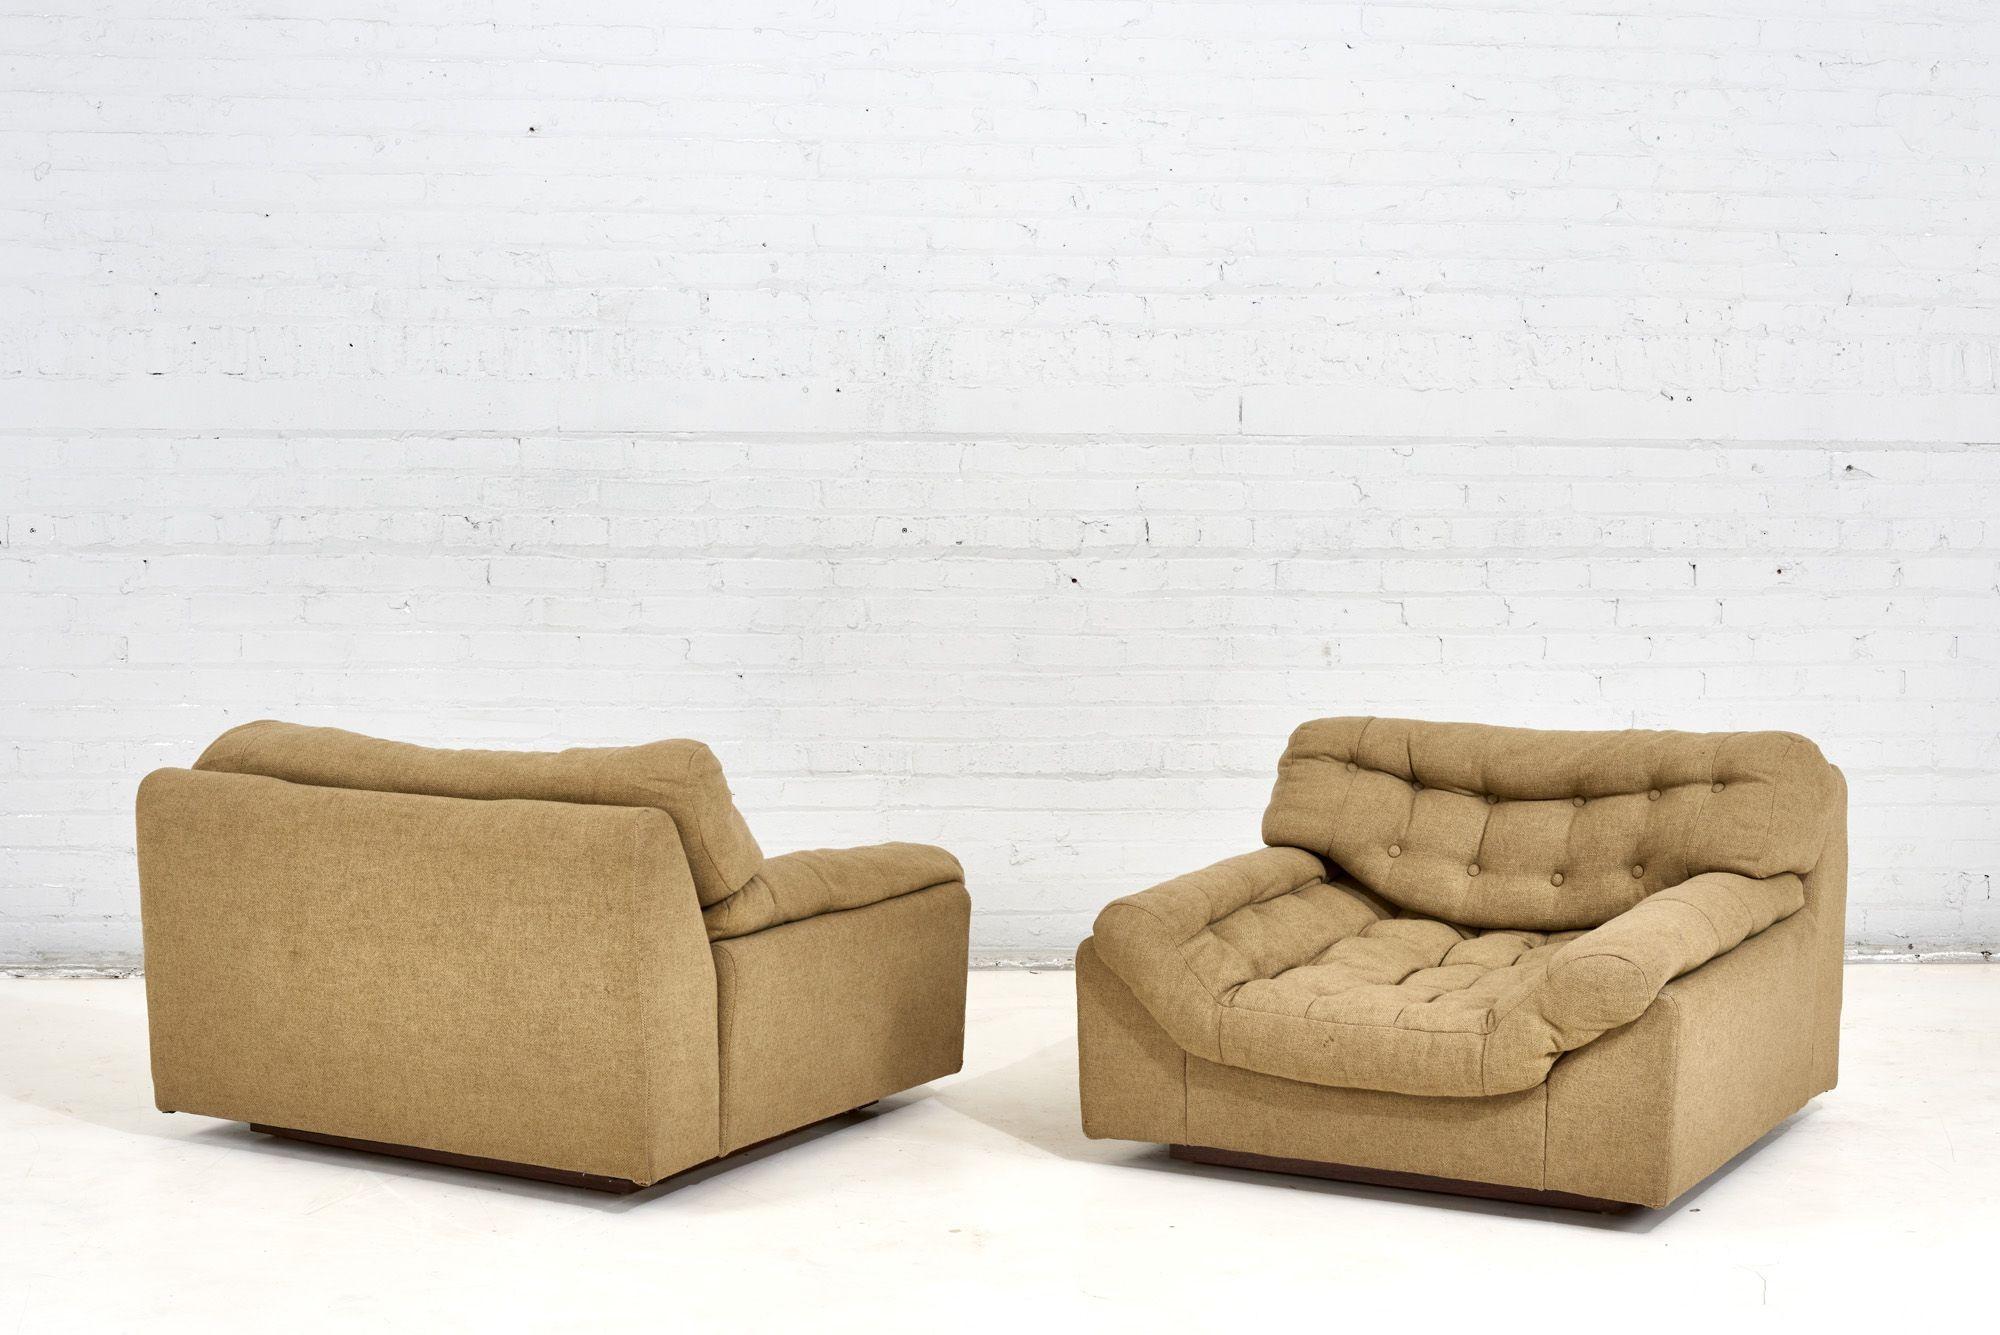 Mid-20th Century American Modern Biscuit Tufted Lounge Chairs with Walnut Plinth Base, 1960